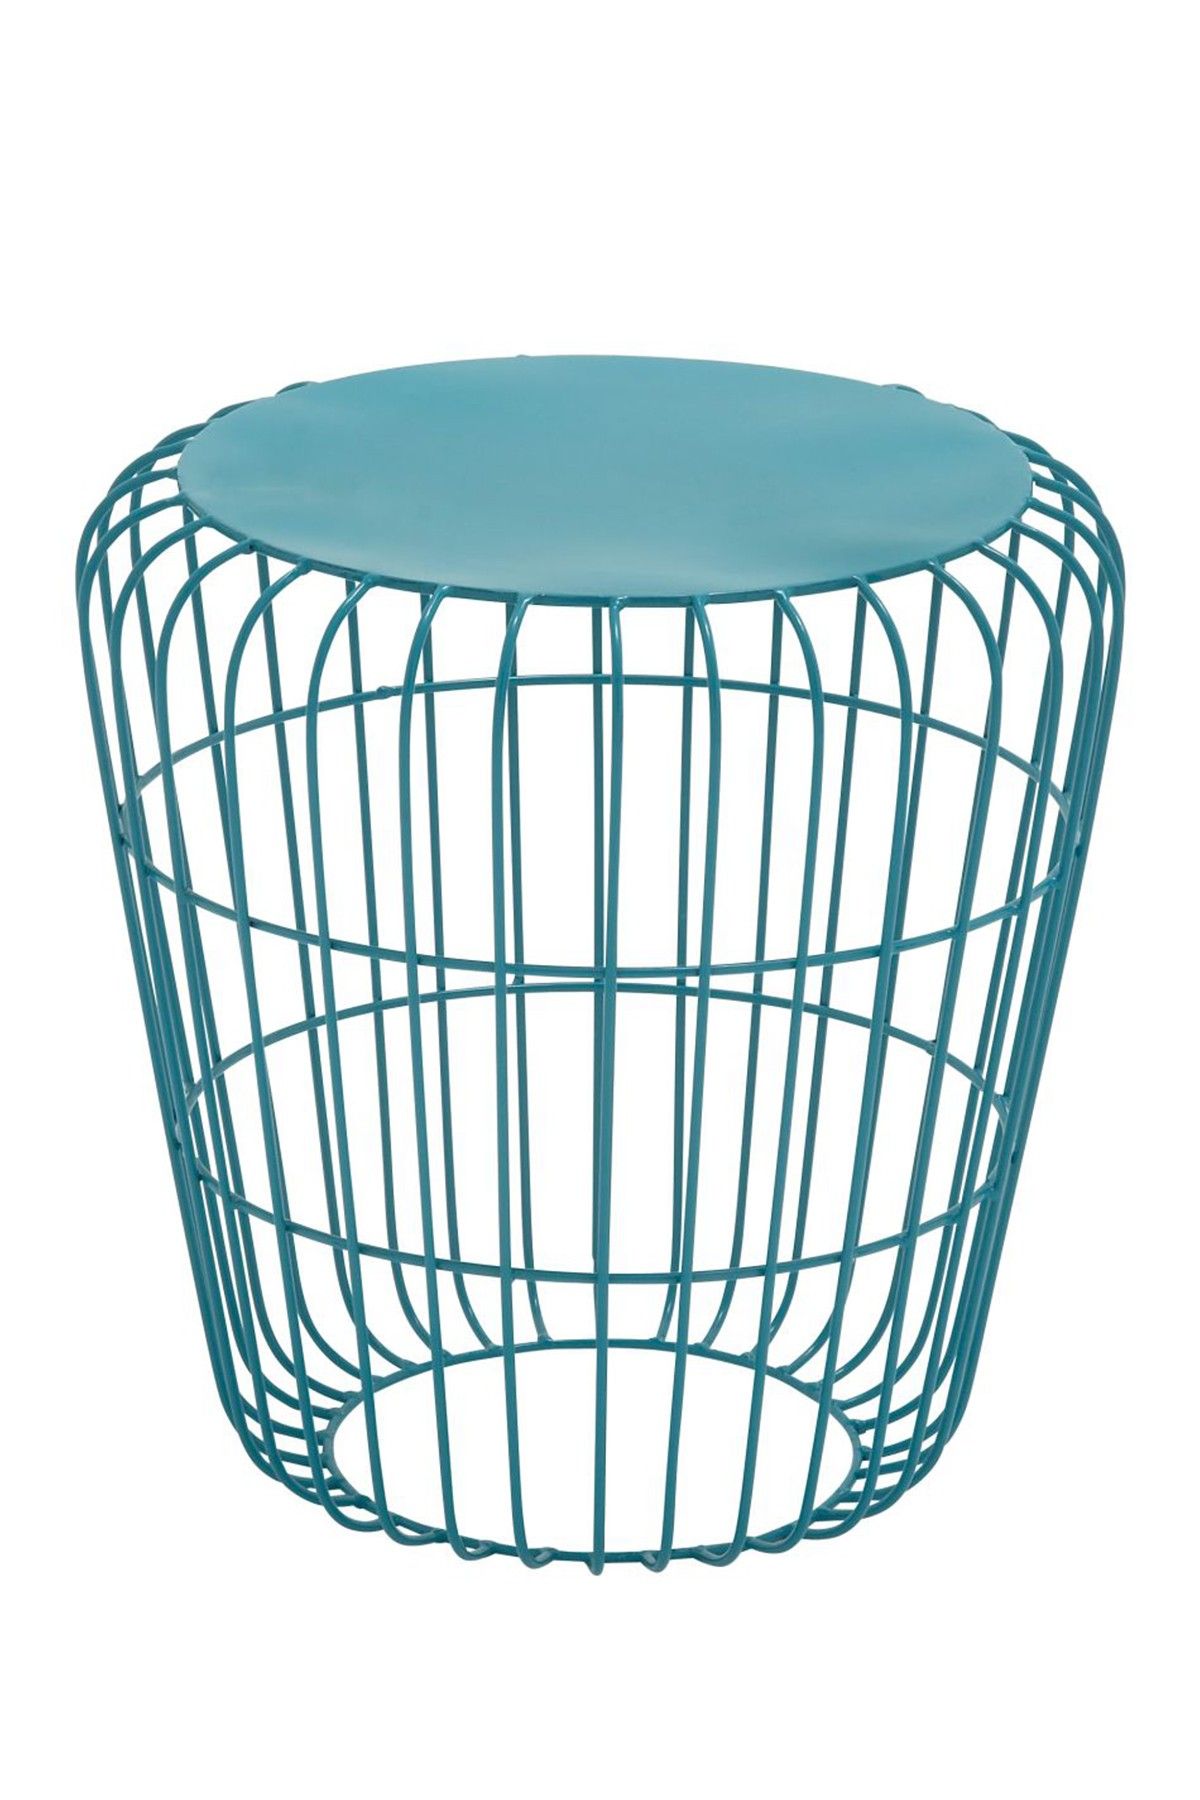 magnificent teal colored accent tables modern gold target ott tall cabinet decorative glass bench furniture antique kijiji threshold living storage room for table round outdoor